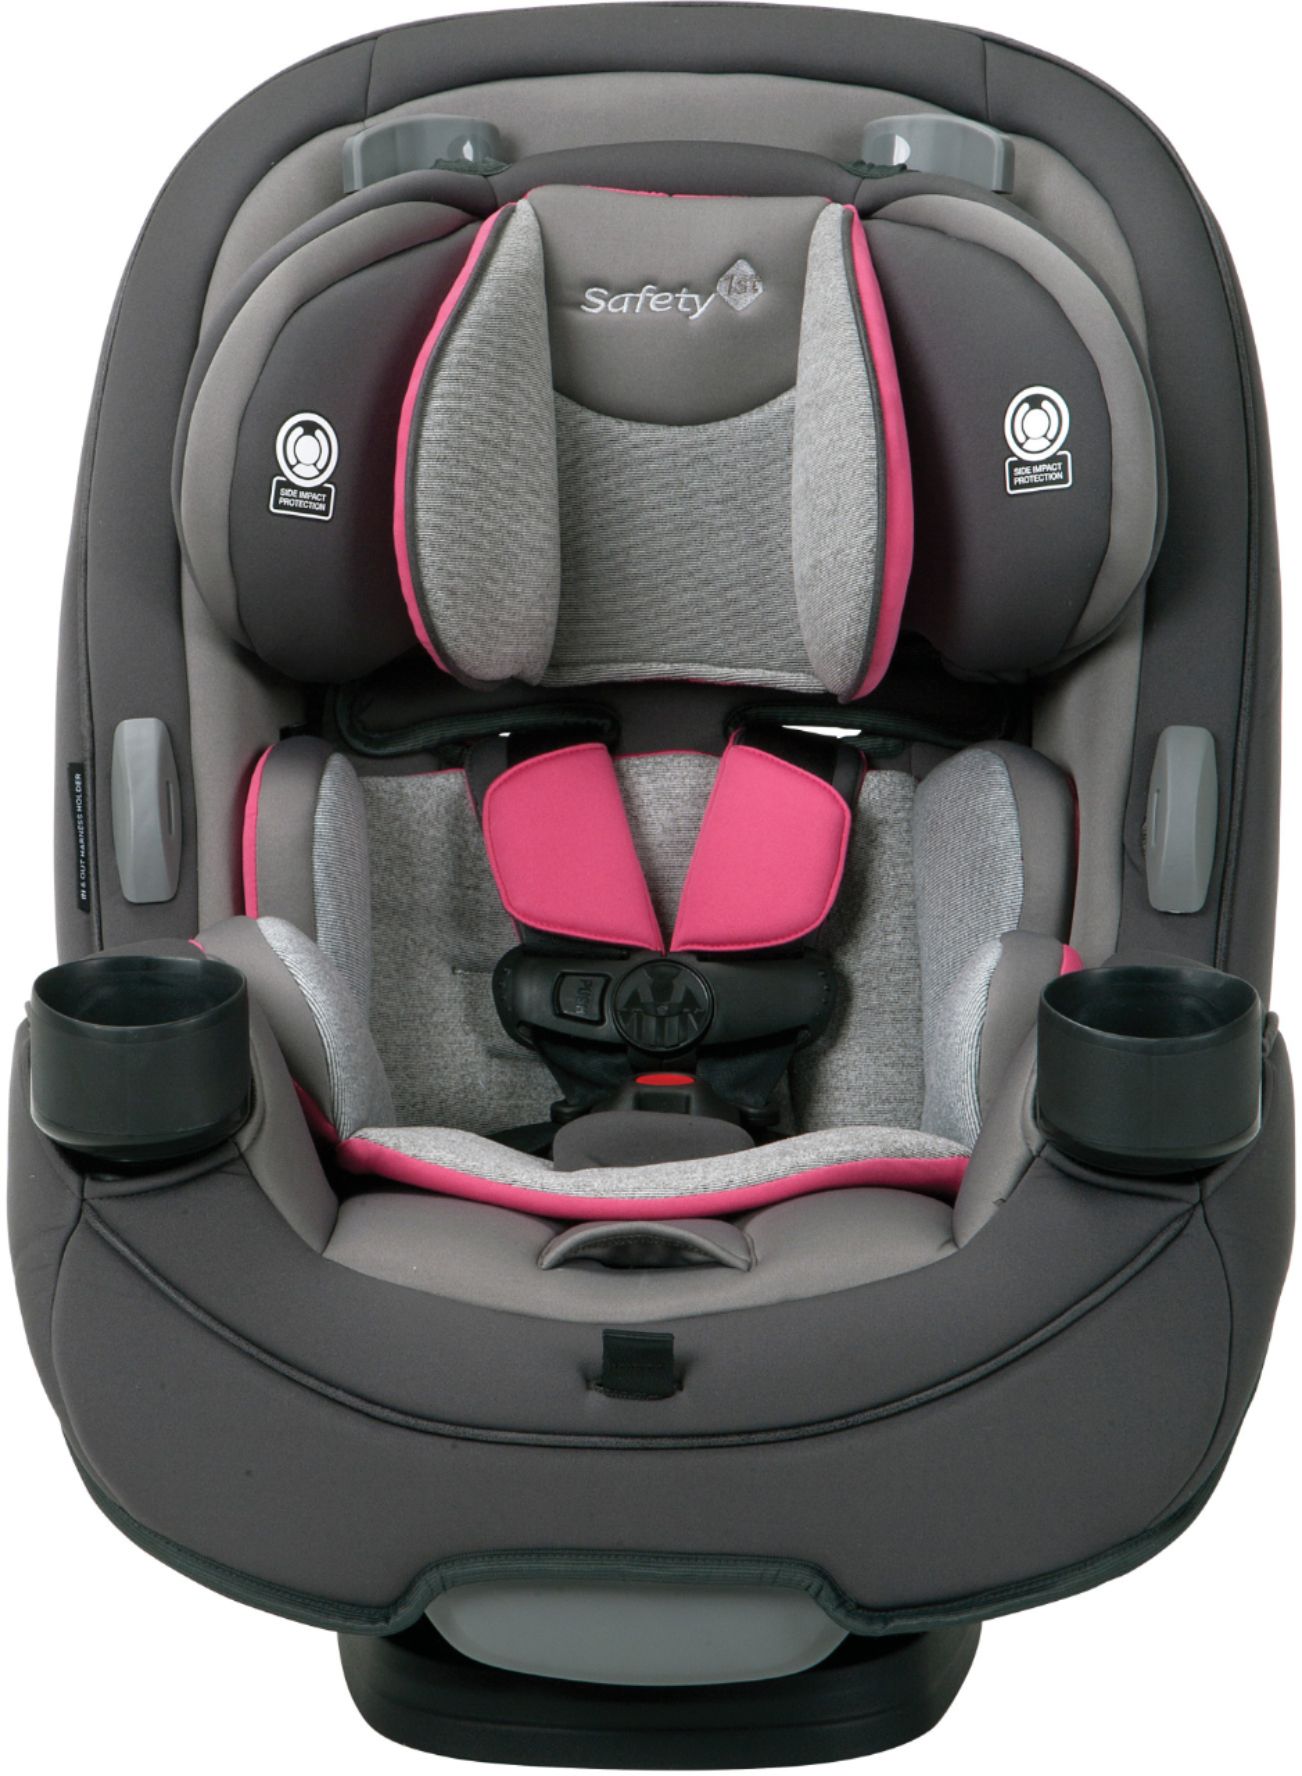 All In One Convertible Car Seat Pink, Safety 1st Grow And Go 3 In 1 Convertible Car Seat Rating